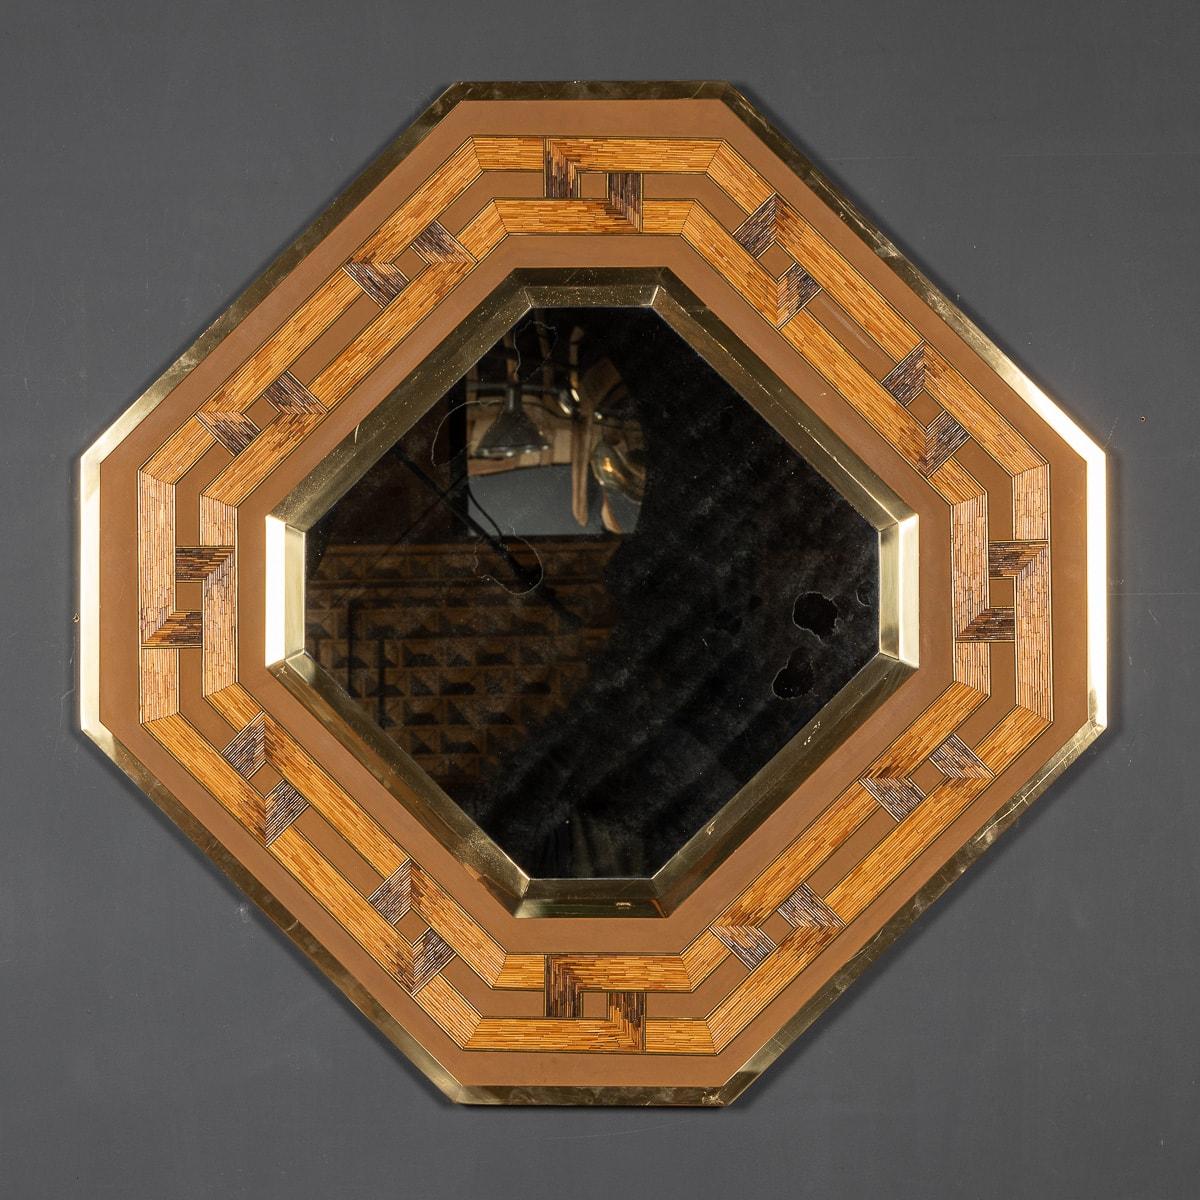 Crafted in the mid-20th century, Gabriella Crespi's octagonal mirror showcases a striking geometric design fashioned from reeds and bamboo, elegantly encased in a brass frame. Its adaptable nature allows for hanging it as either a square or at an